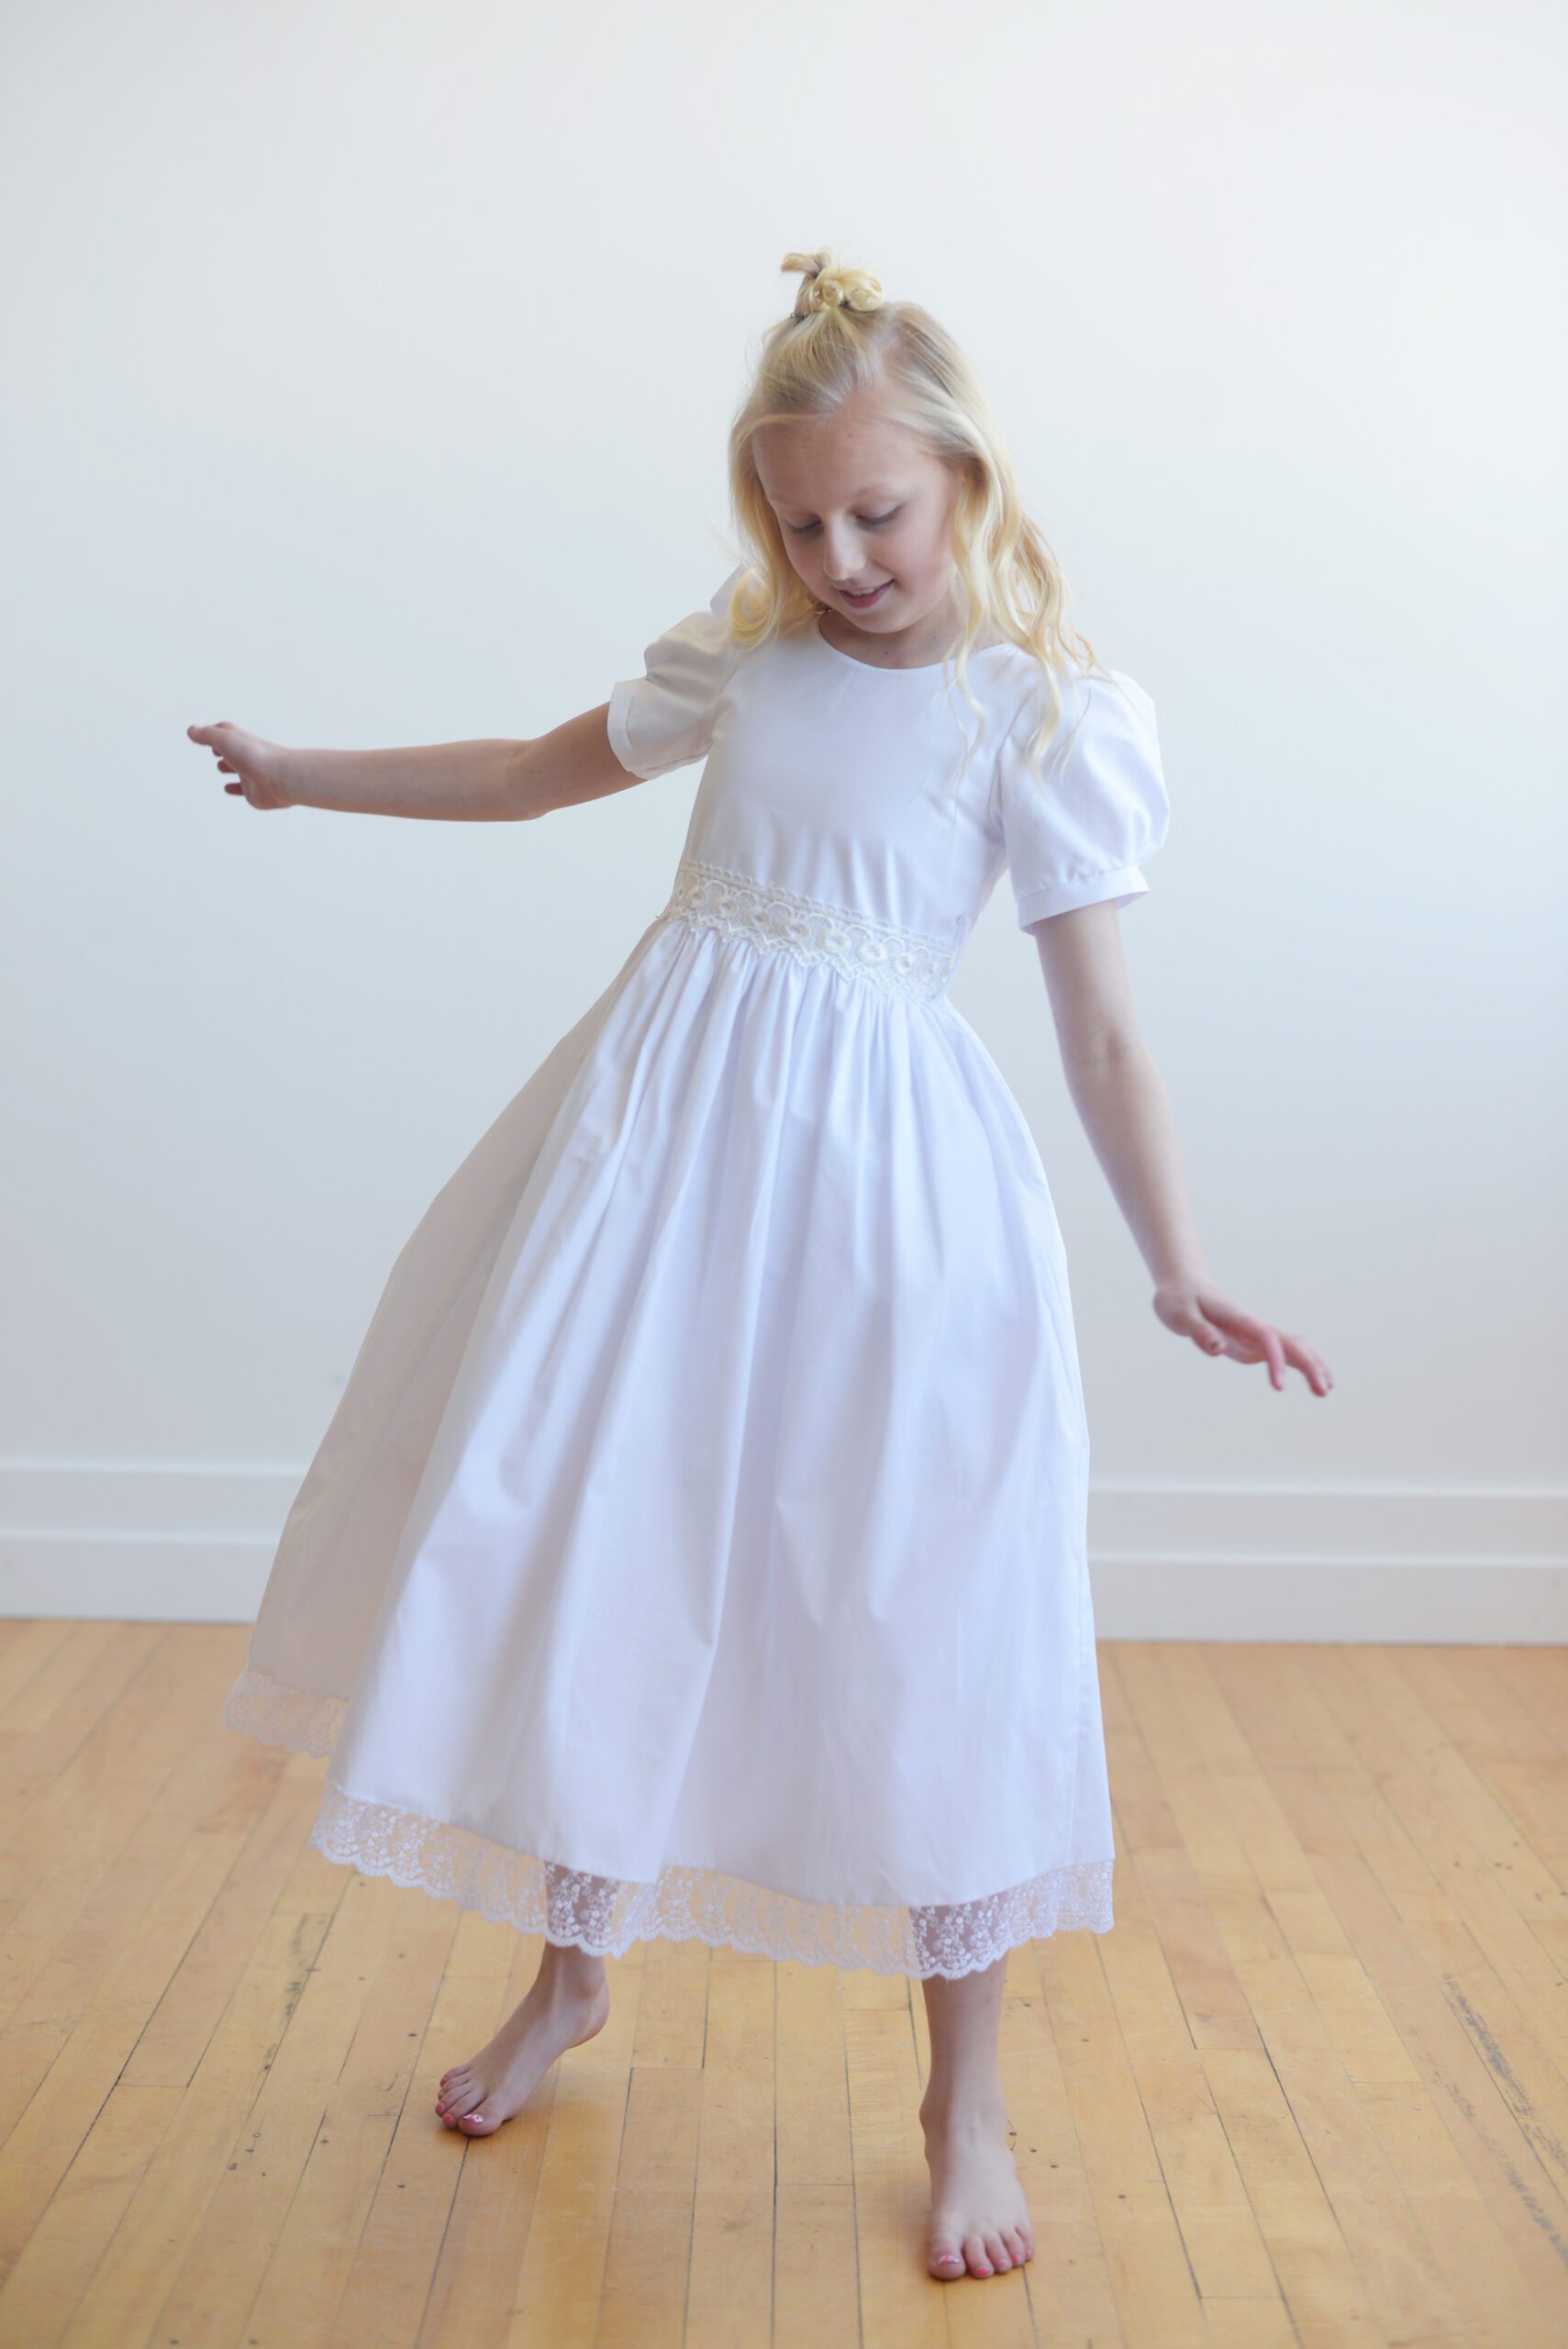 A photo of an 8 year old girl wearing a white communion dress with a lace sash